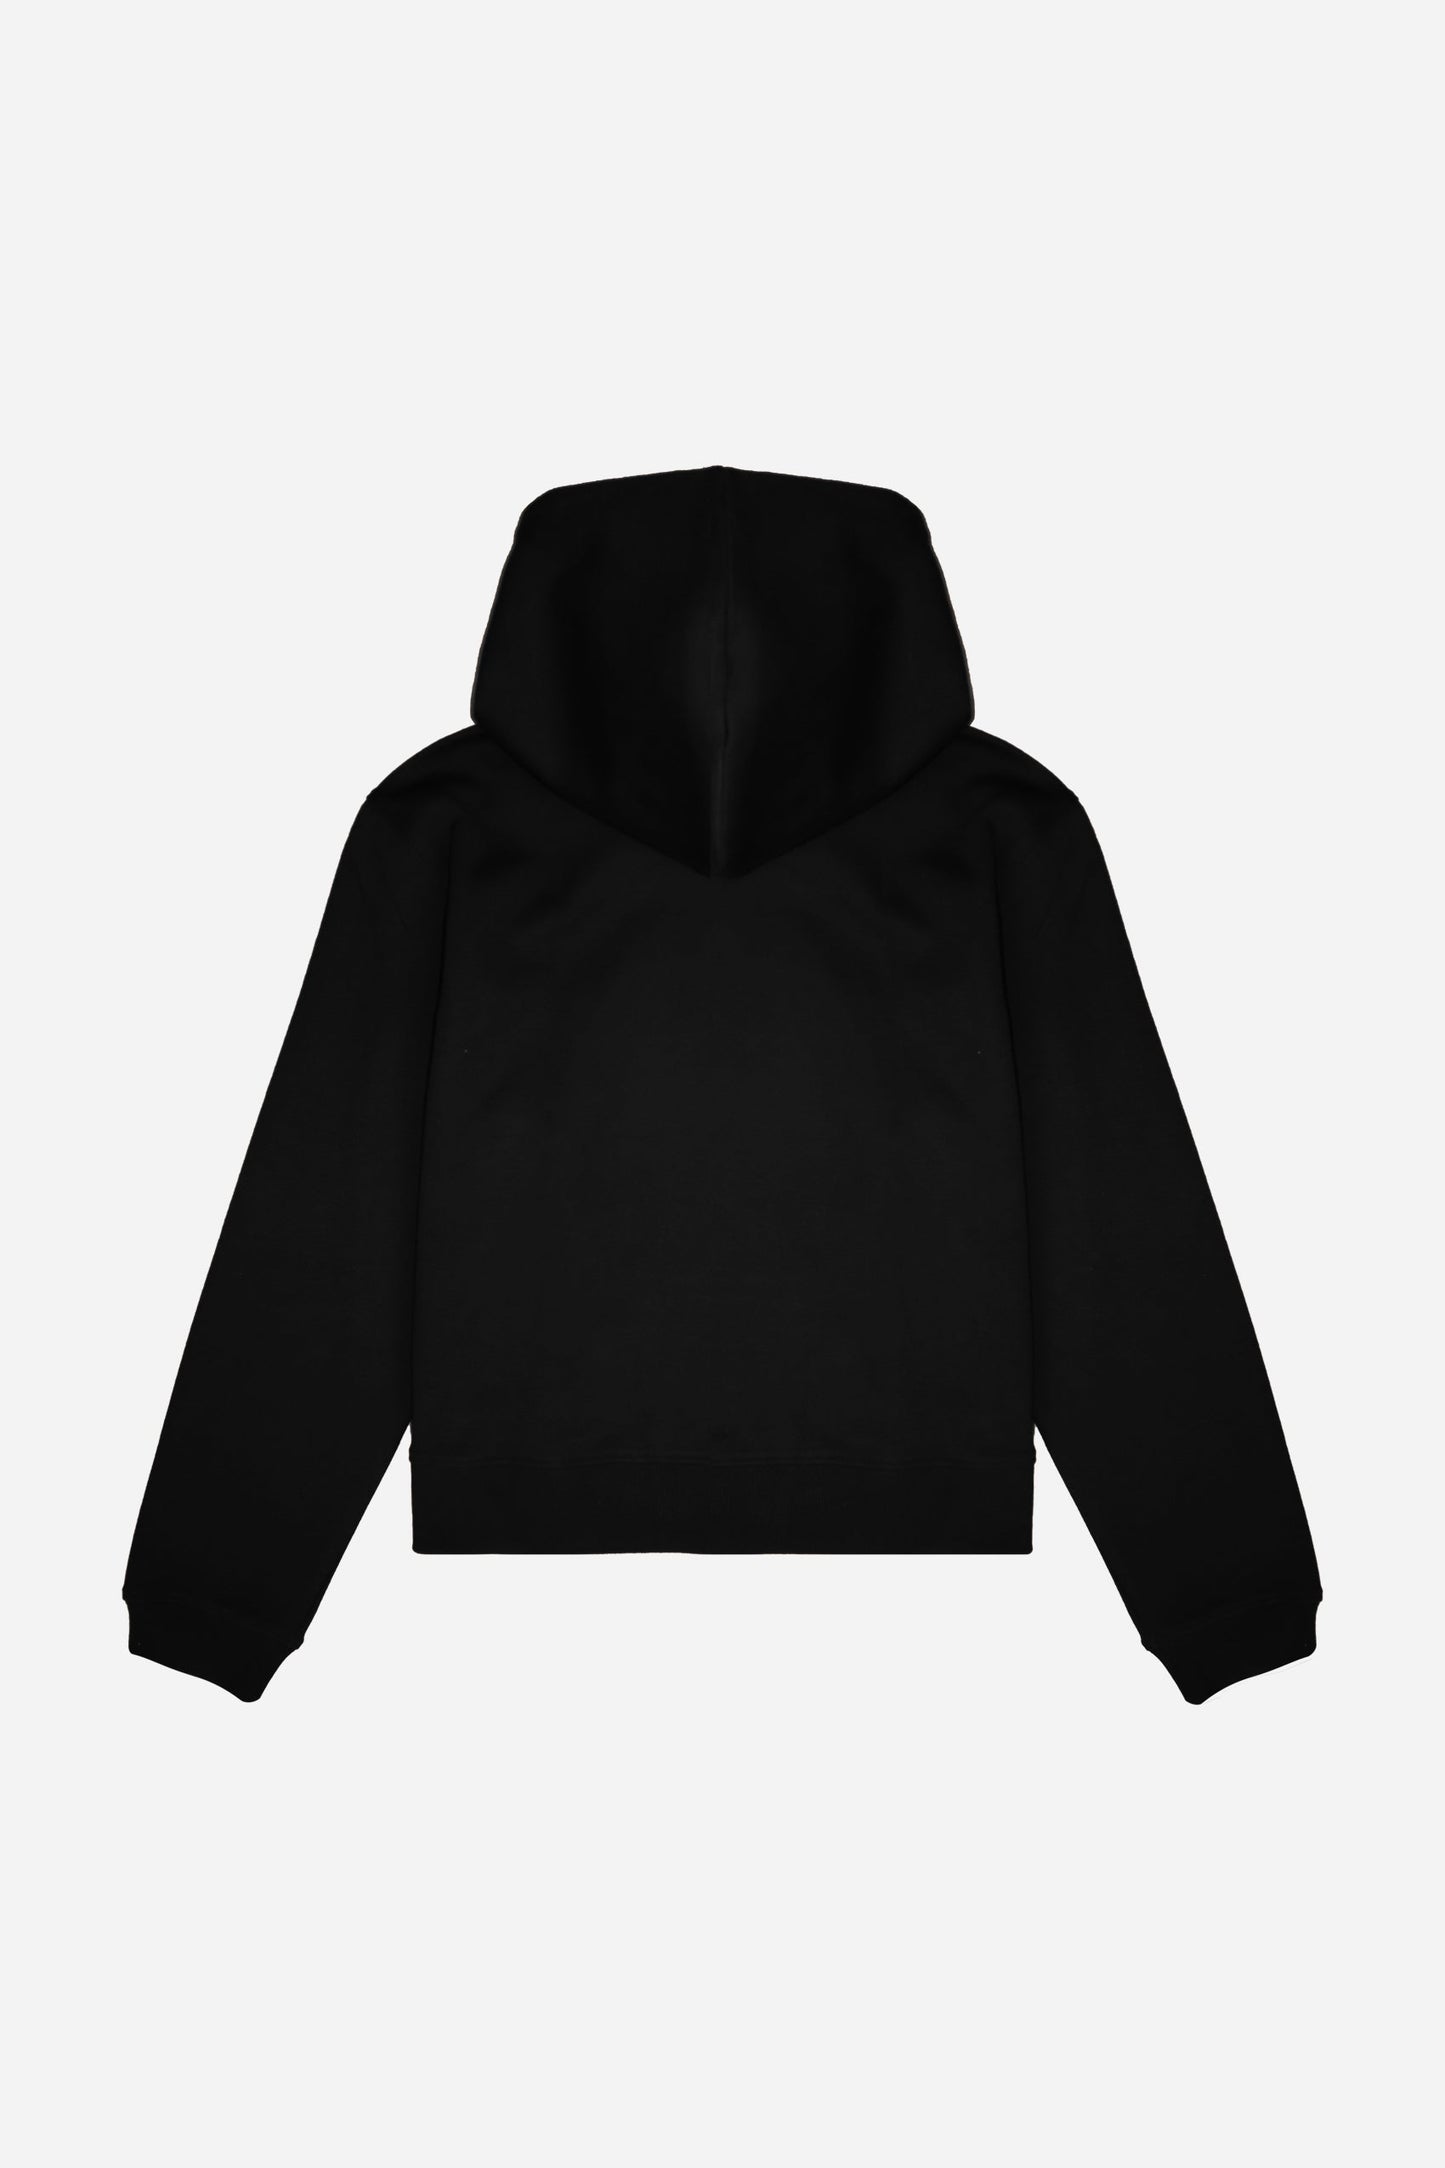 Embroidered Elly Hoodie - Limited to 300